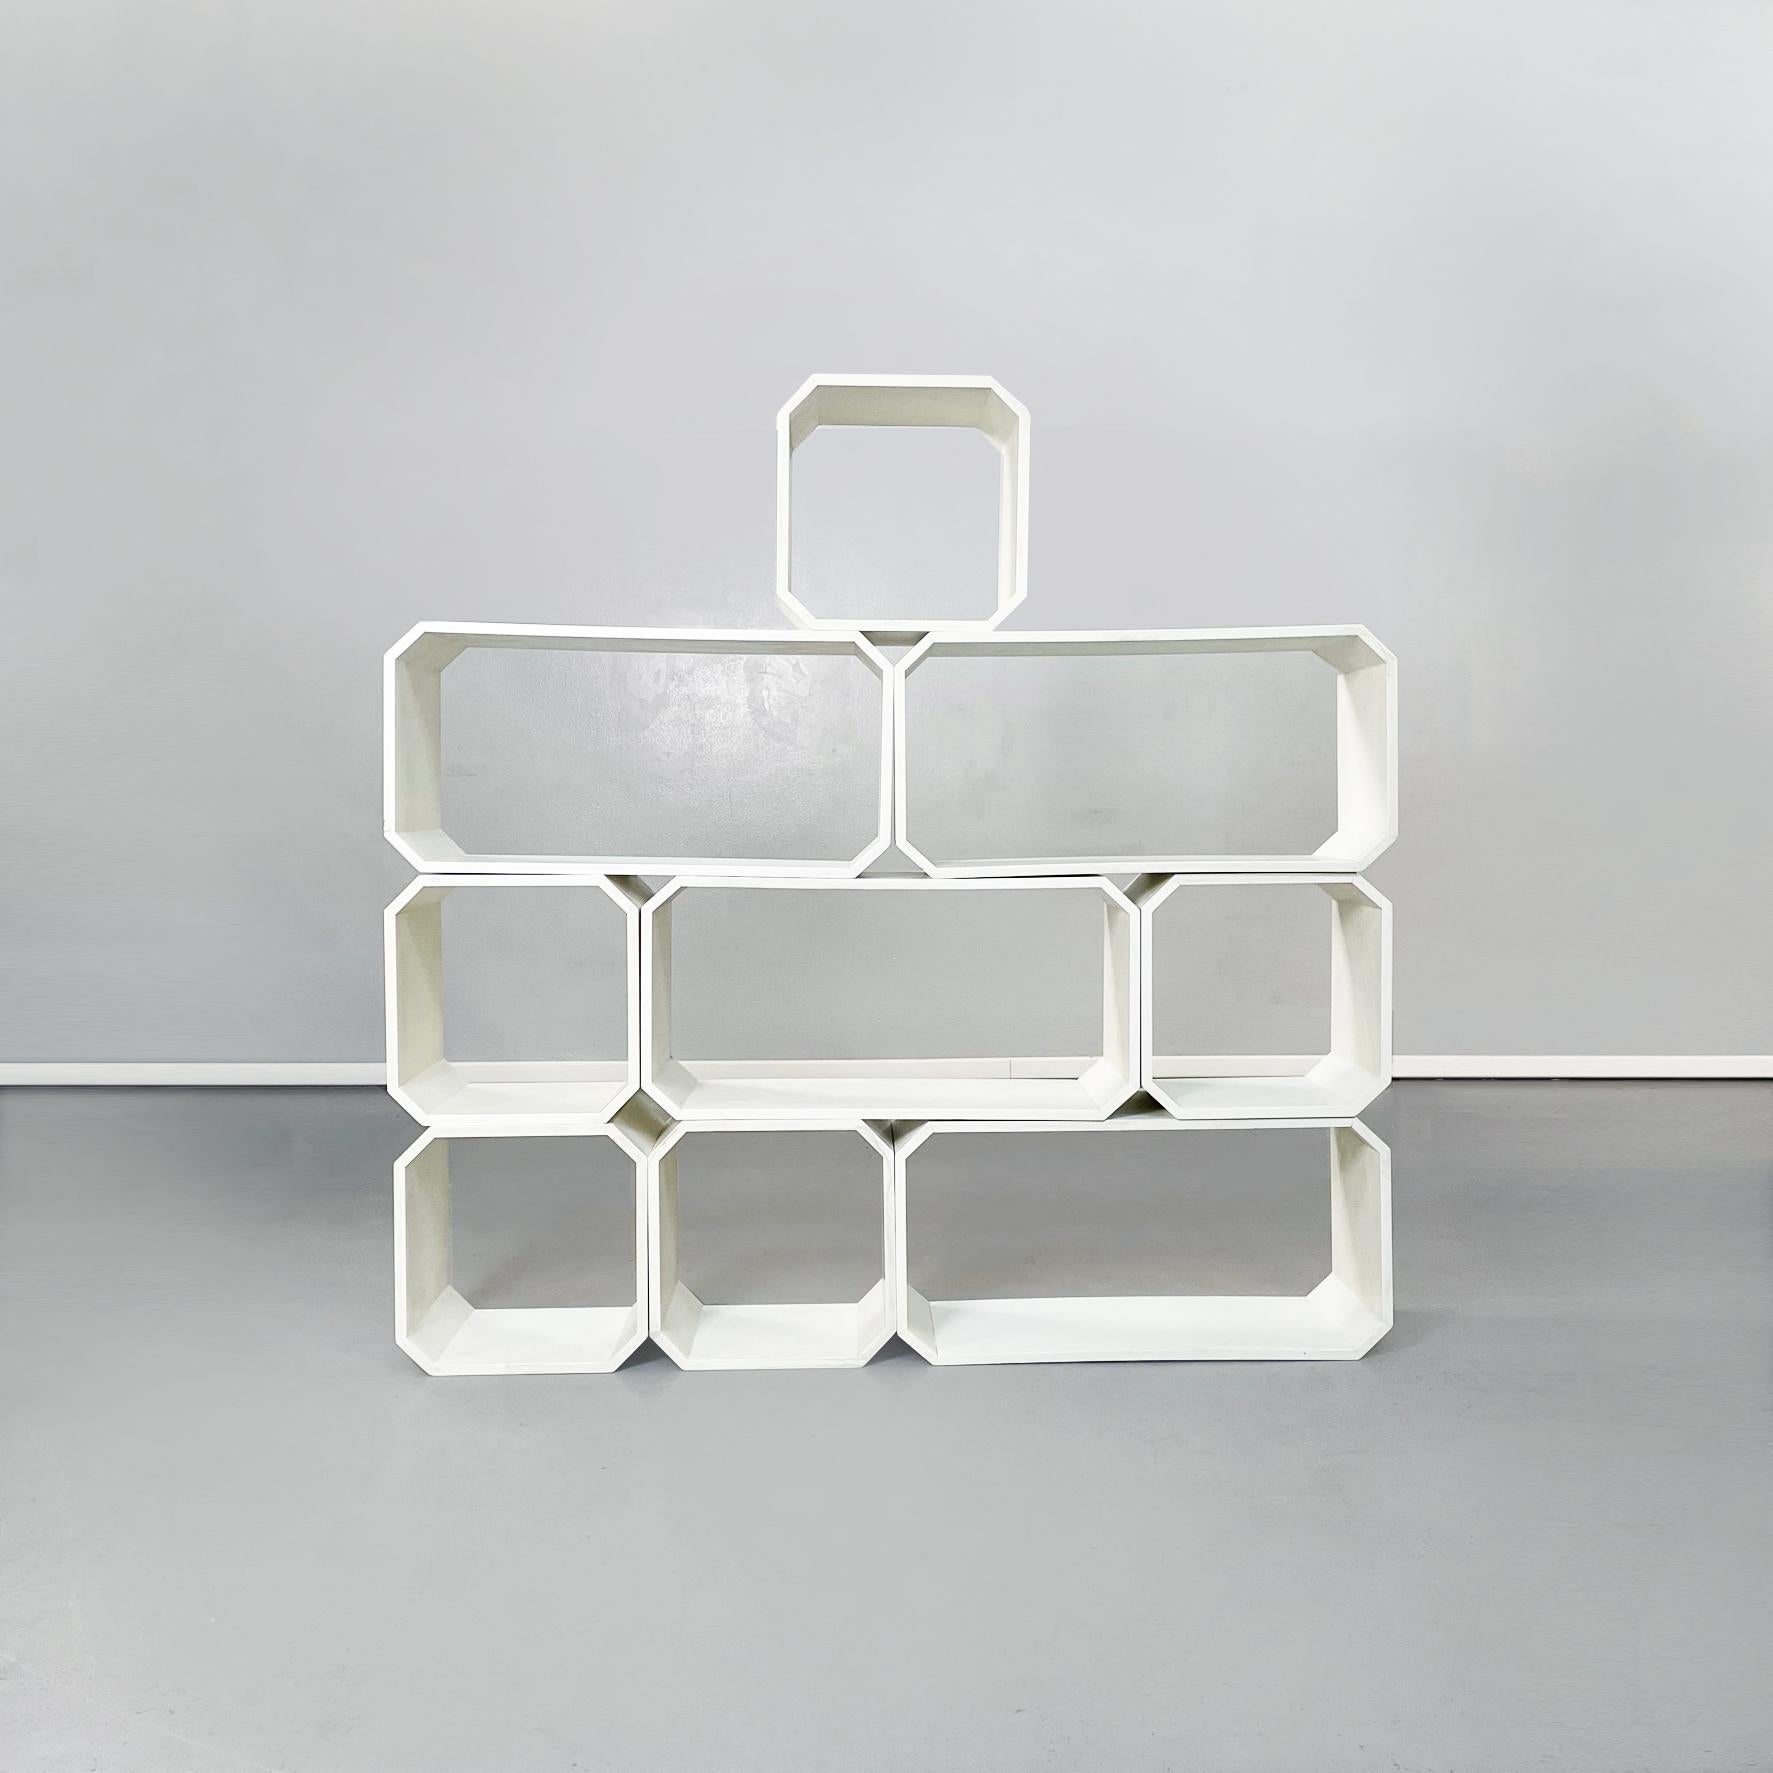 Italian Mid-Century Modern White wood modular bookcase, 1970s.
Modular bookcase composed of 4 rectangles and 5 squares with rounded corners in white painted solid wood. Can be assembled as desired.
1970s.
Vintage conditions. Has several cracks